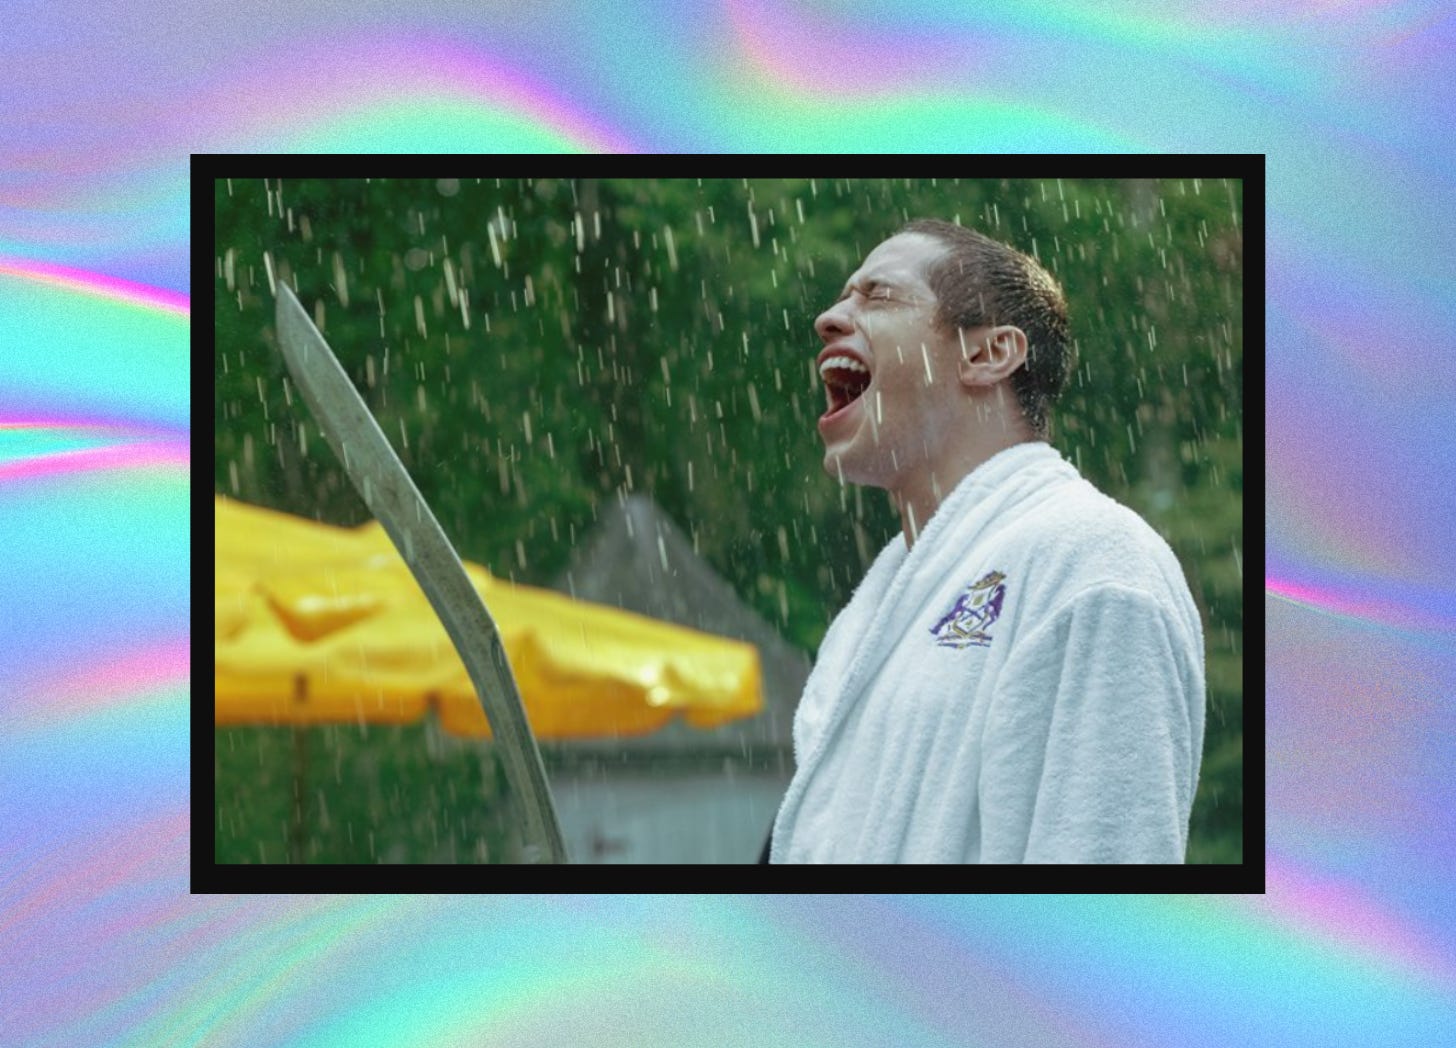 A screenshot of Pete Davidson holding a katana and yelling in the rain. His eyes are closed and he’s wearing a white bathrobe. The screenshot is cropped in the center of the frame. Behind it is a groovy purple and blue swirling background.